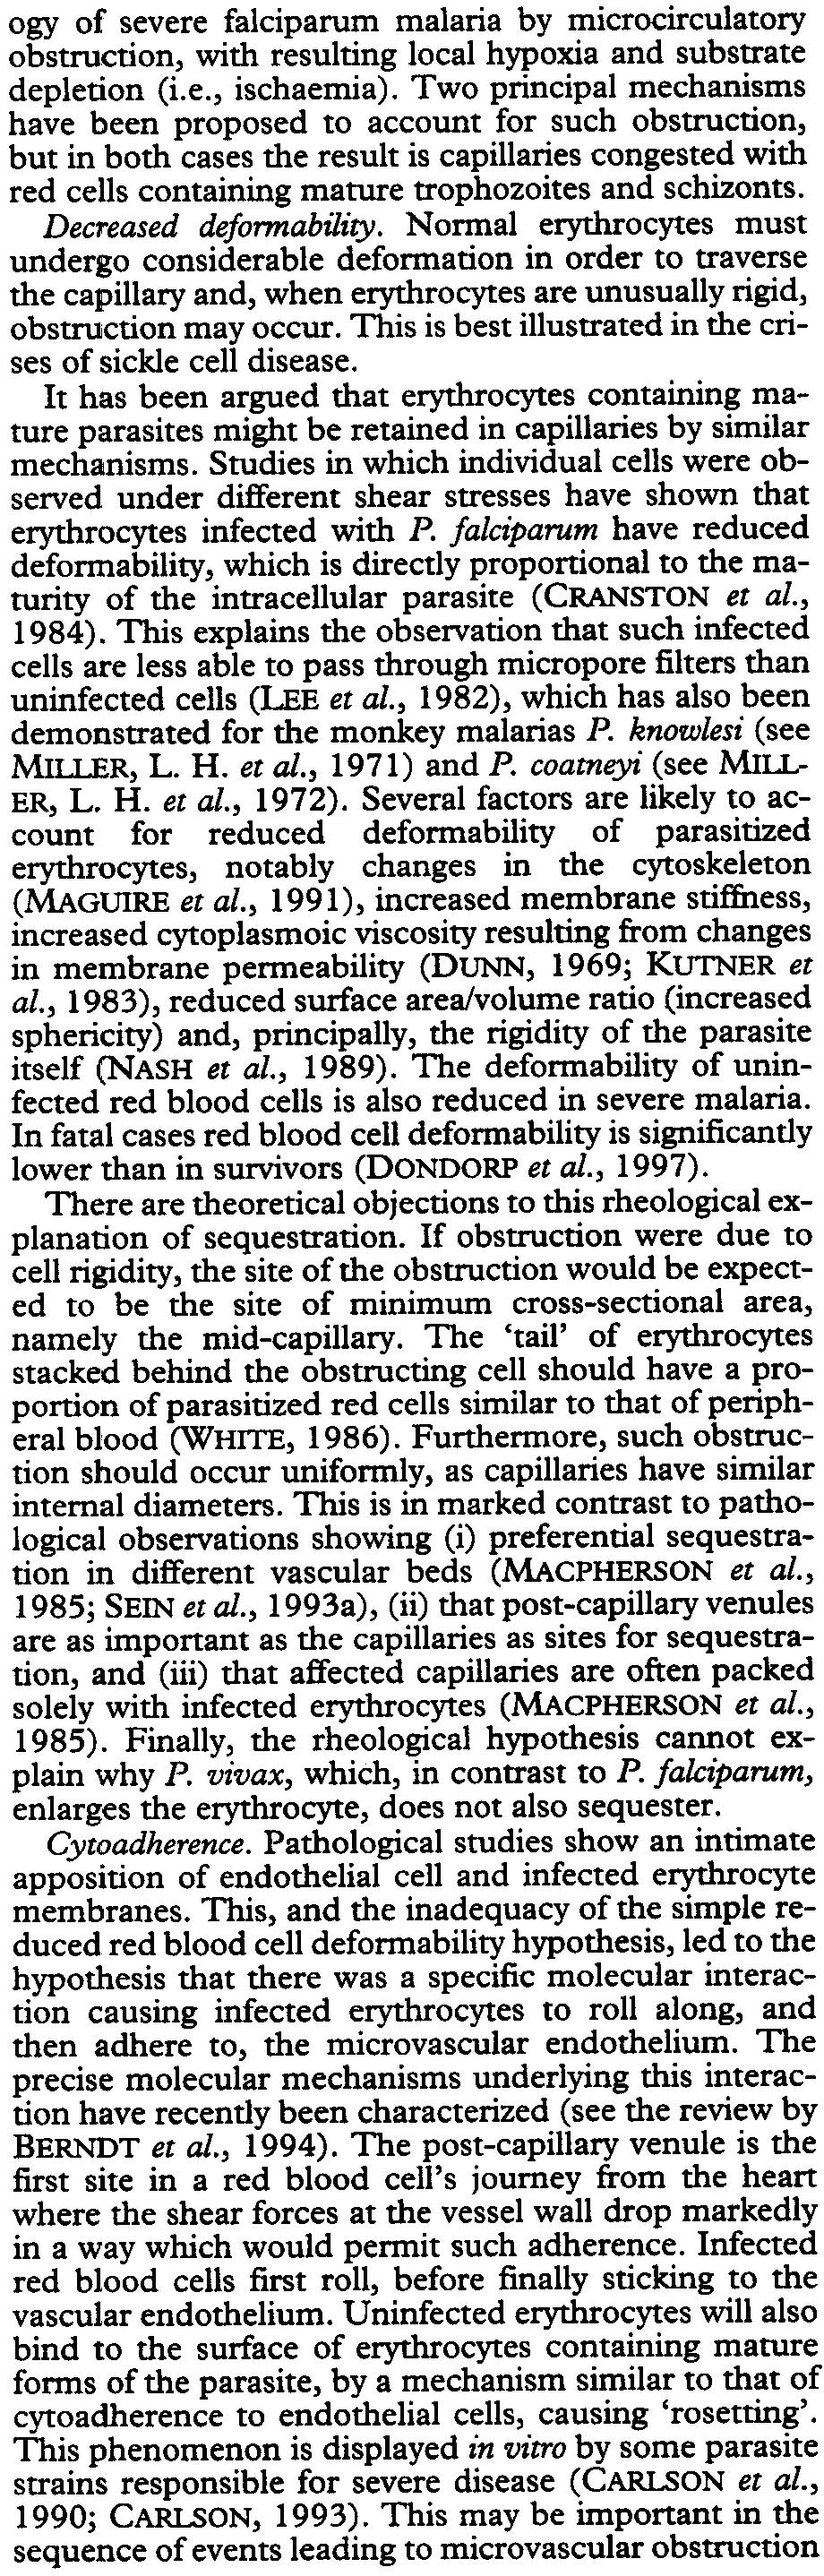 TRANSACTIONS OFTHE ROYAL SOCIETY OFTROPICAL MEDICINE AND HYGIENE (2000) 94, SUPPLEMENT 51121 quine-resistant falciparum malaria despite its undoubted aijjti-inflammatory activity.